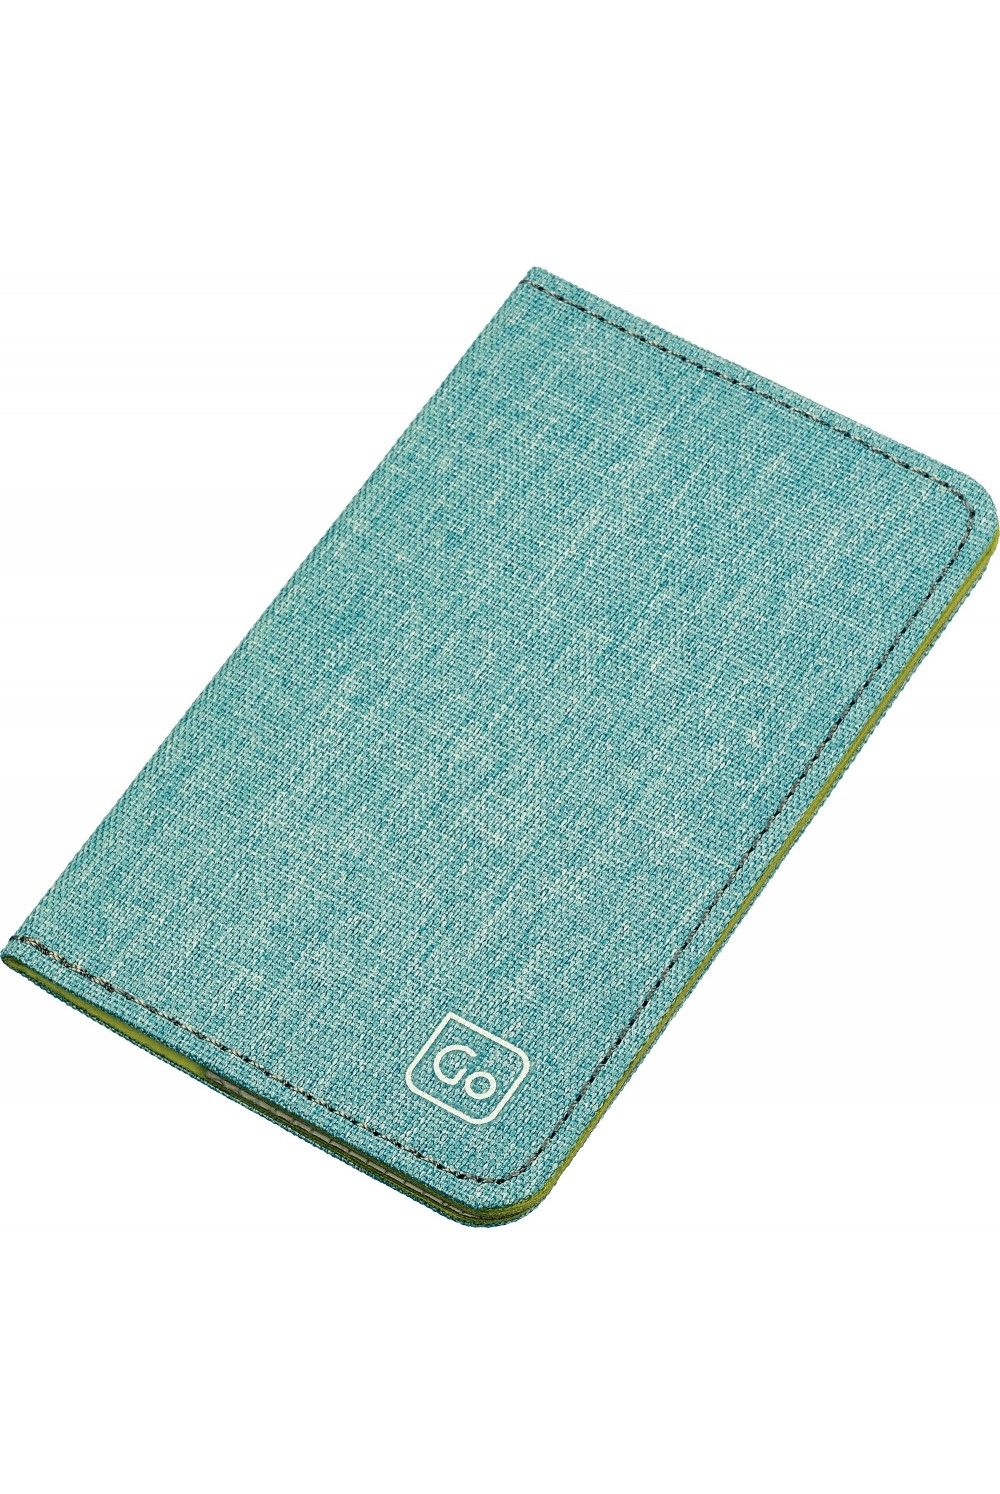 Go Travel Micro Card Wallet RFID protected